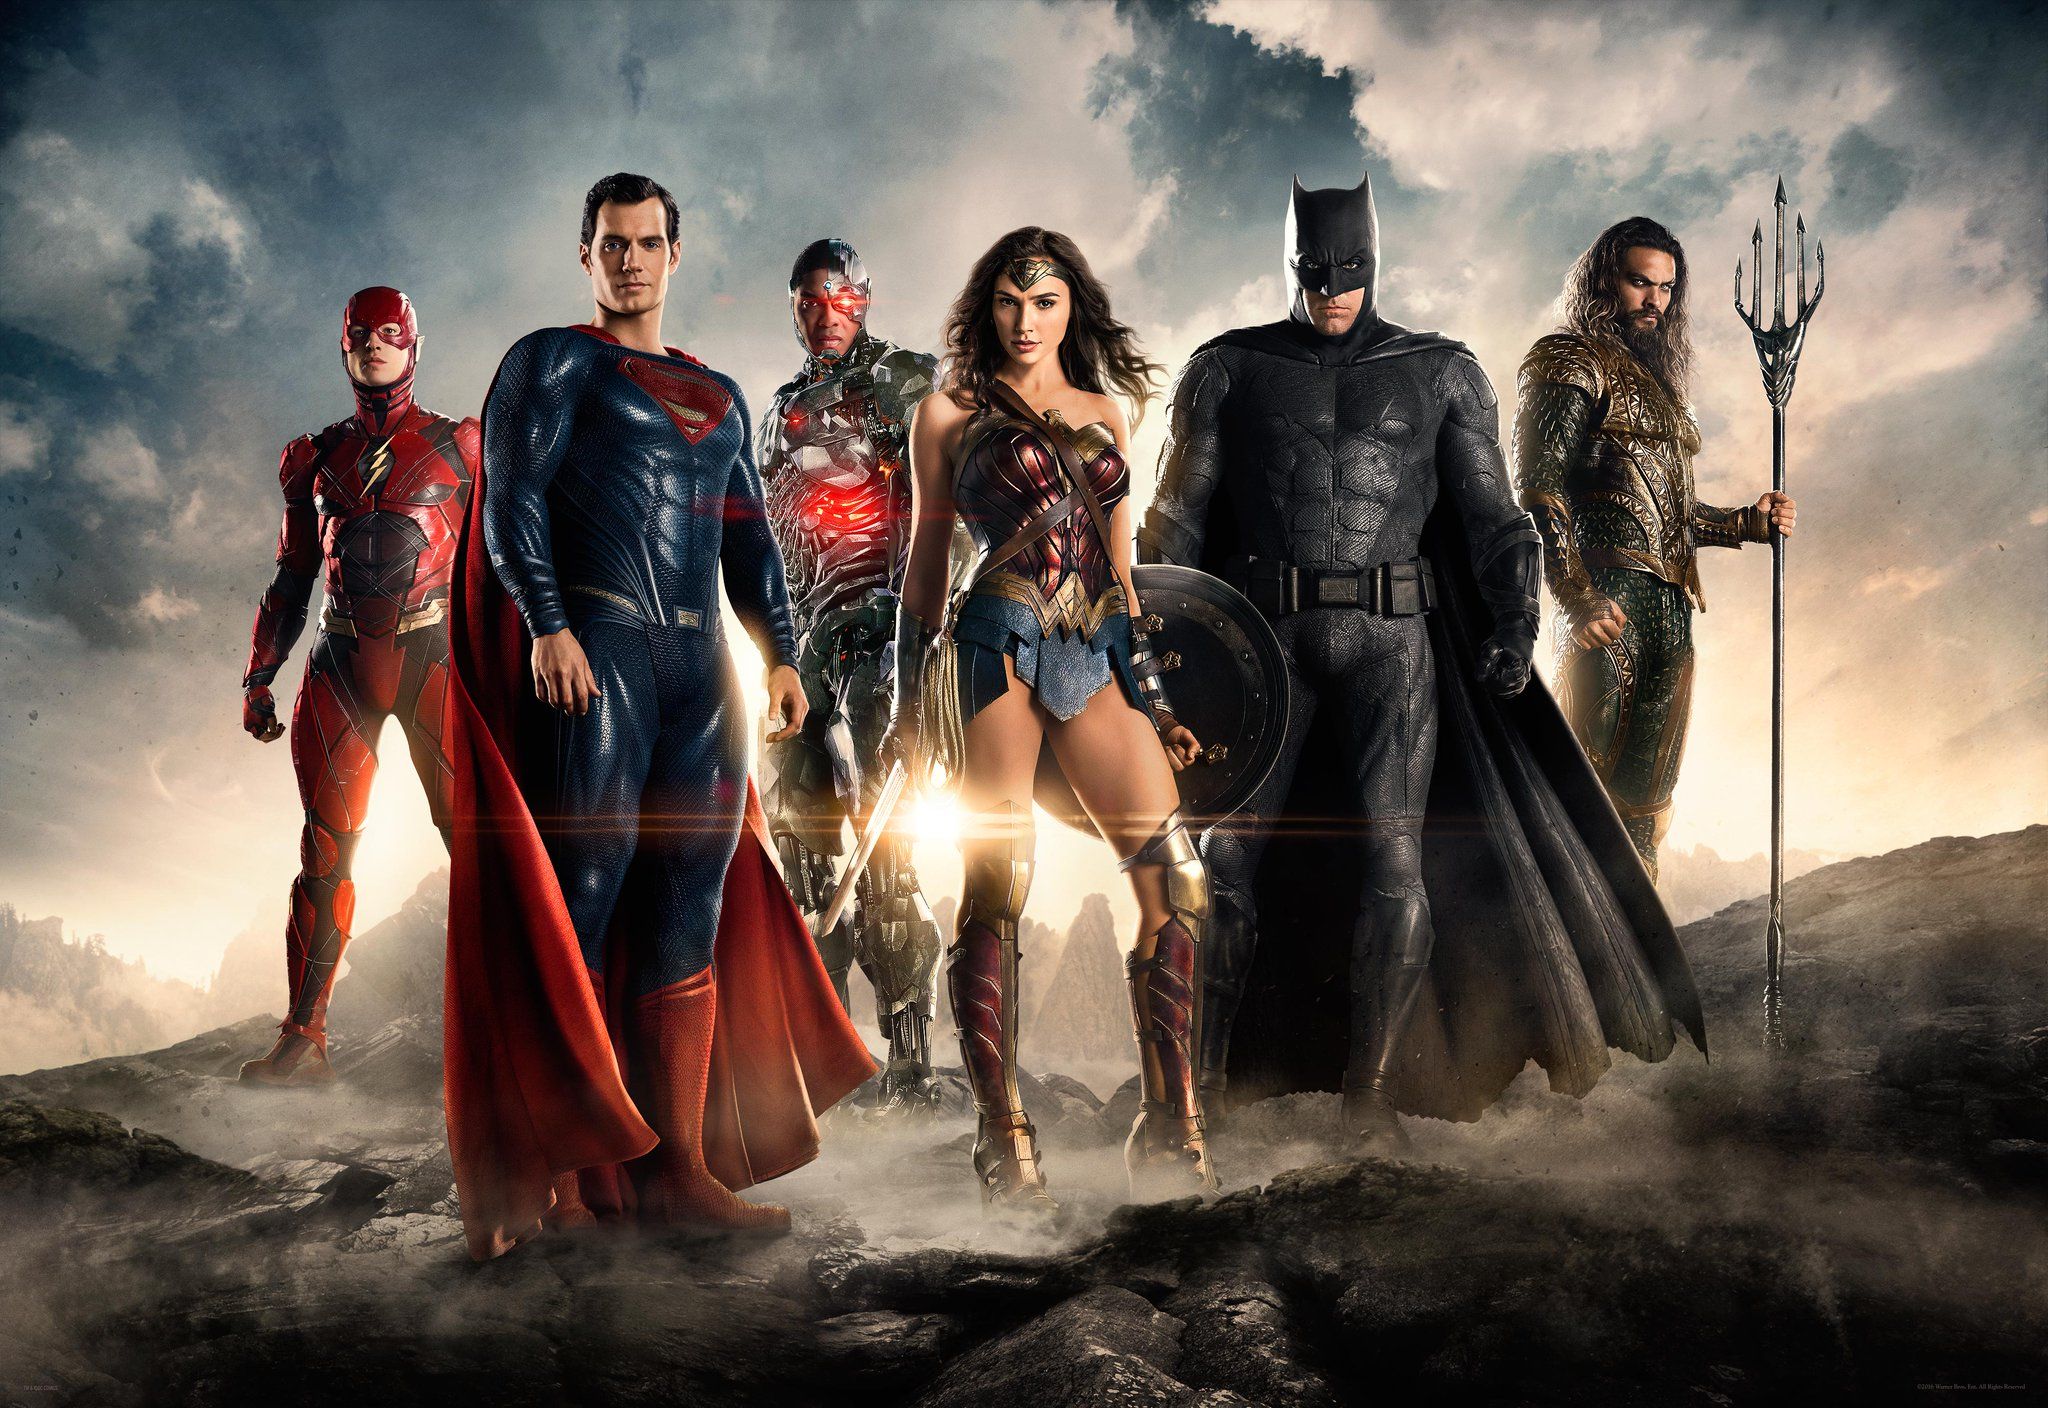 First Official Look at the Justice League